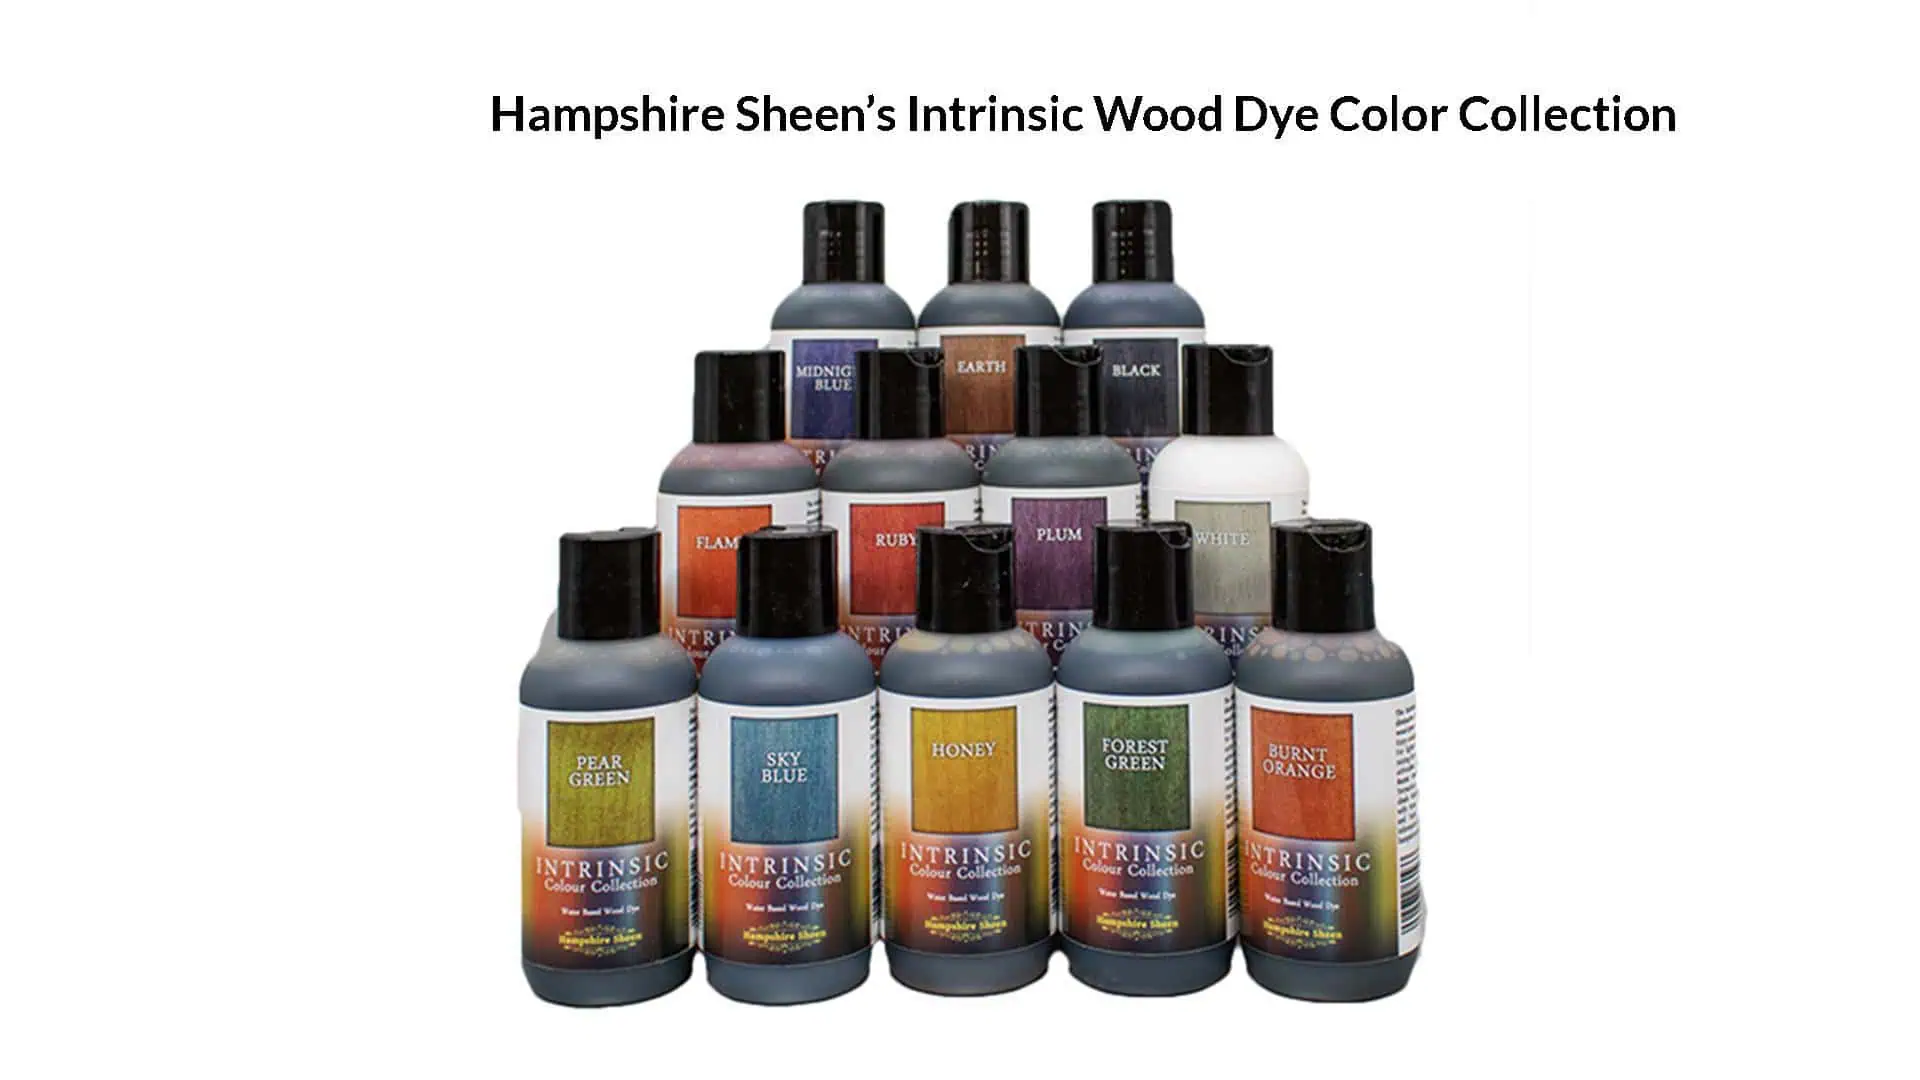 Hampshire Sheen Intrinsic Wood Dye Color Collection - Spiracraft